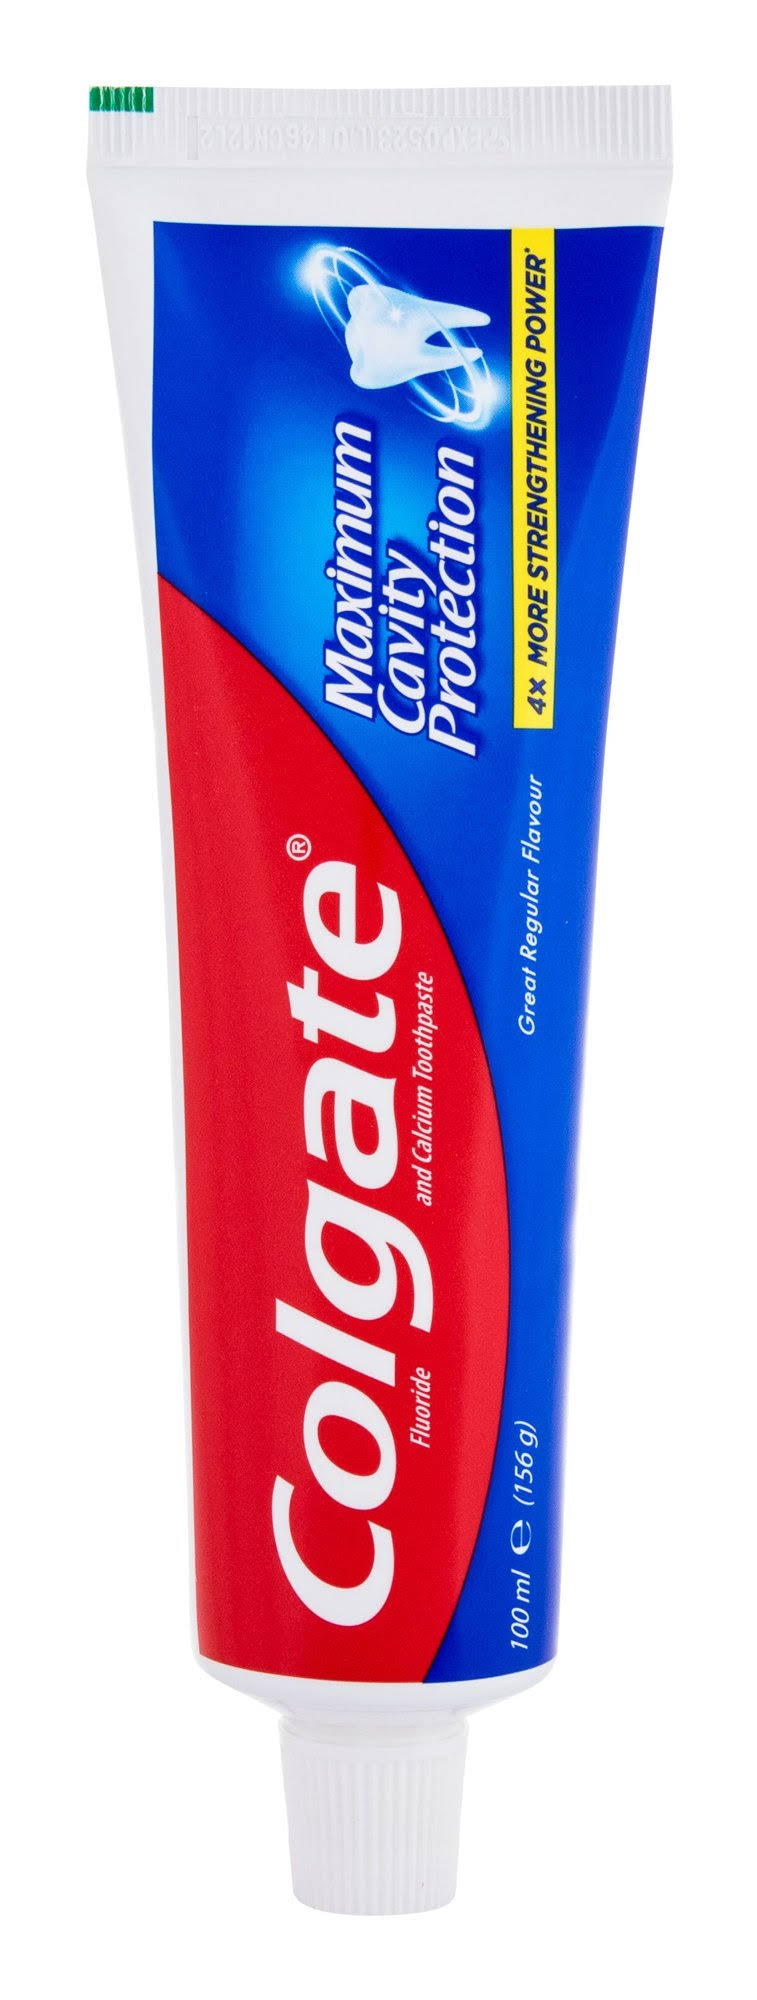 Colgate Toothpaste - Cavity Protection 100ml